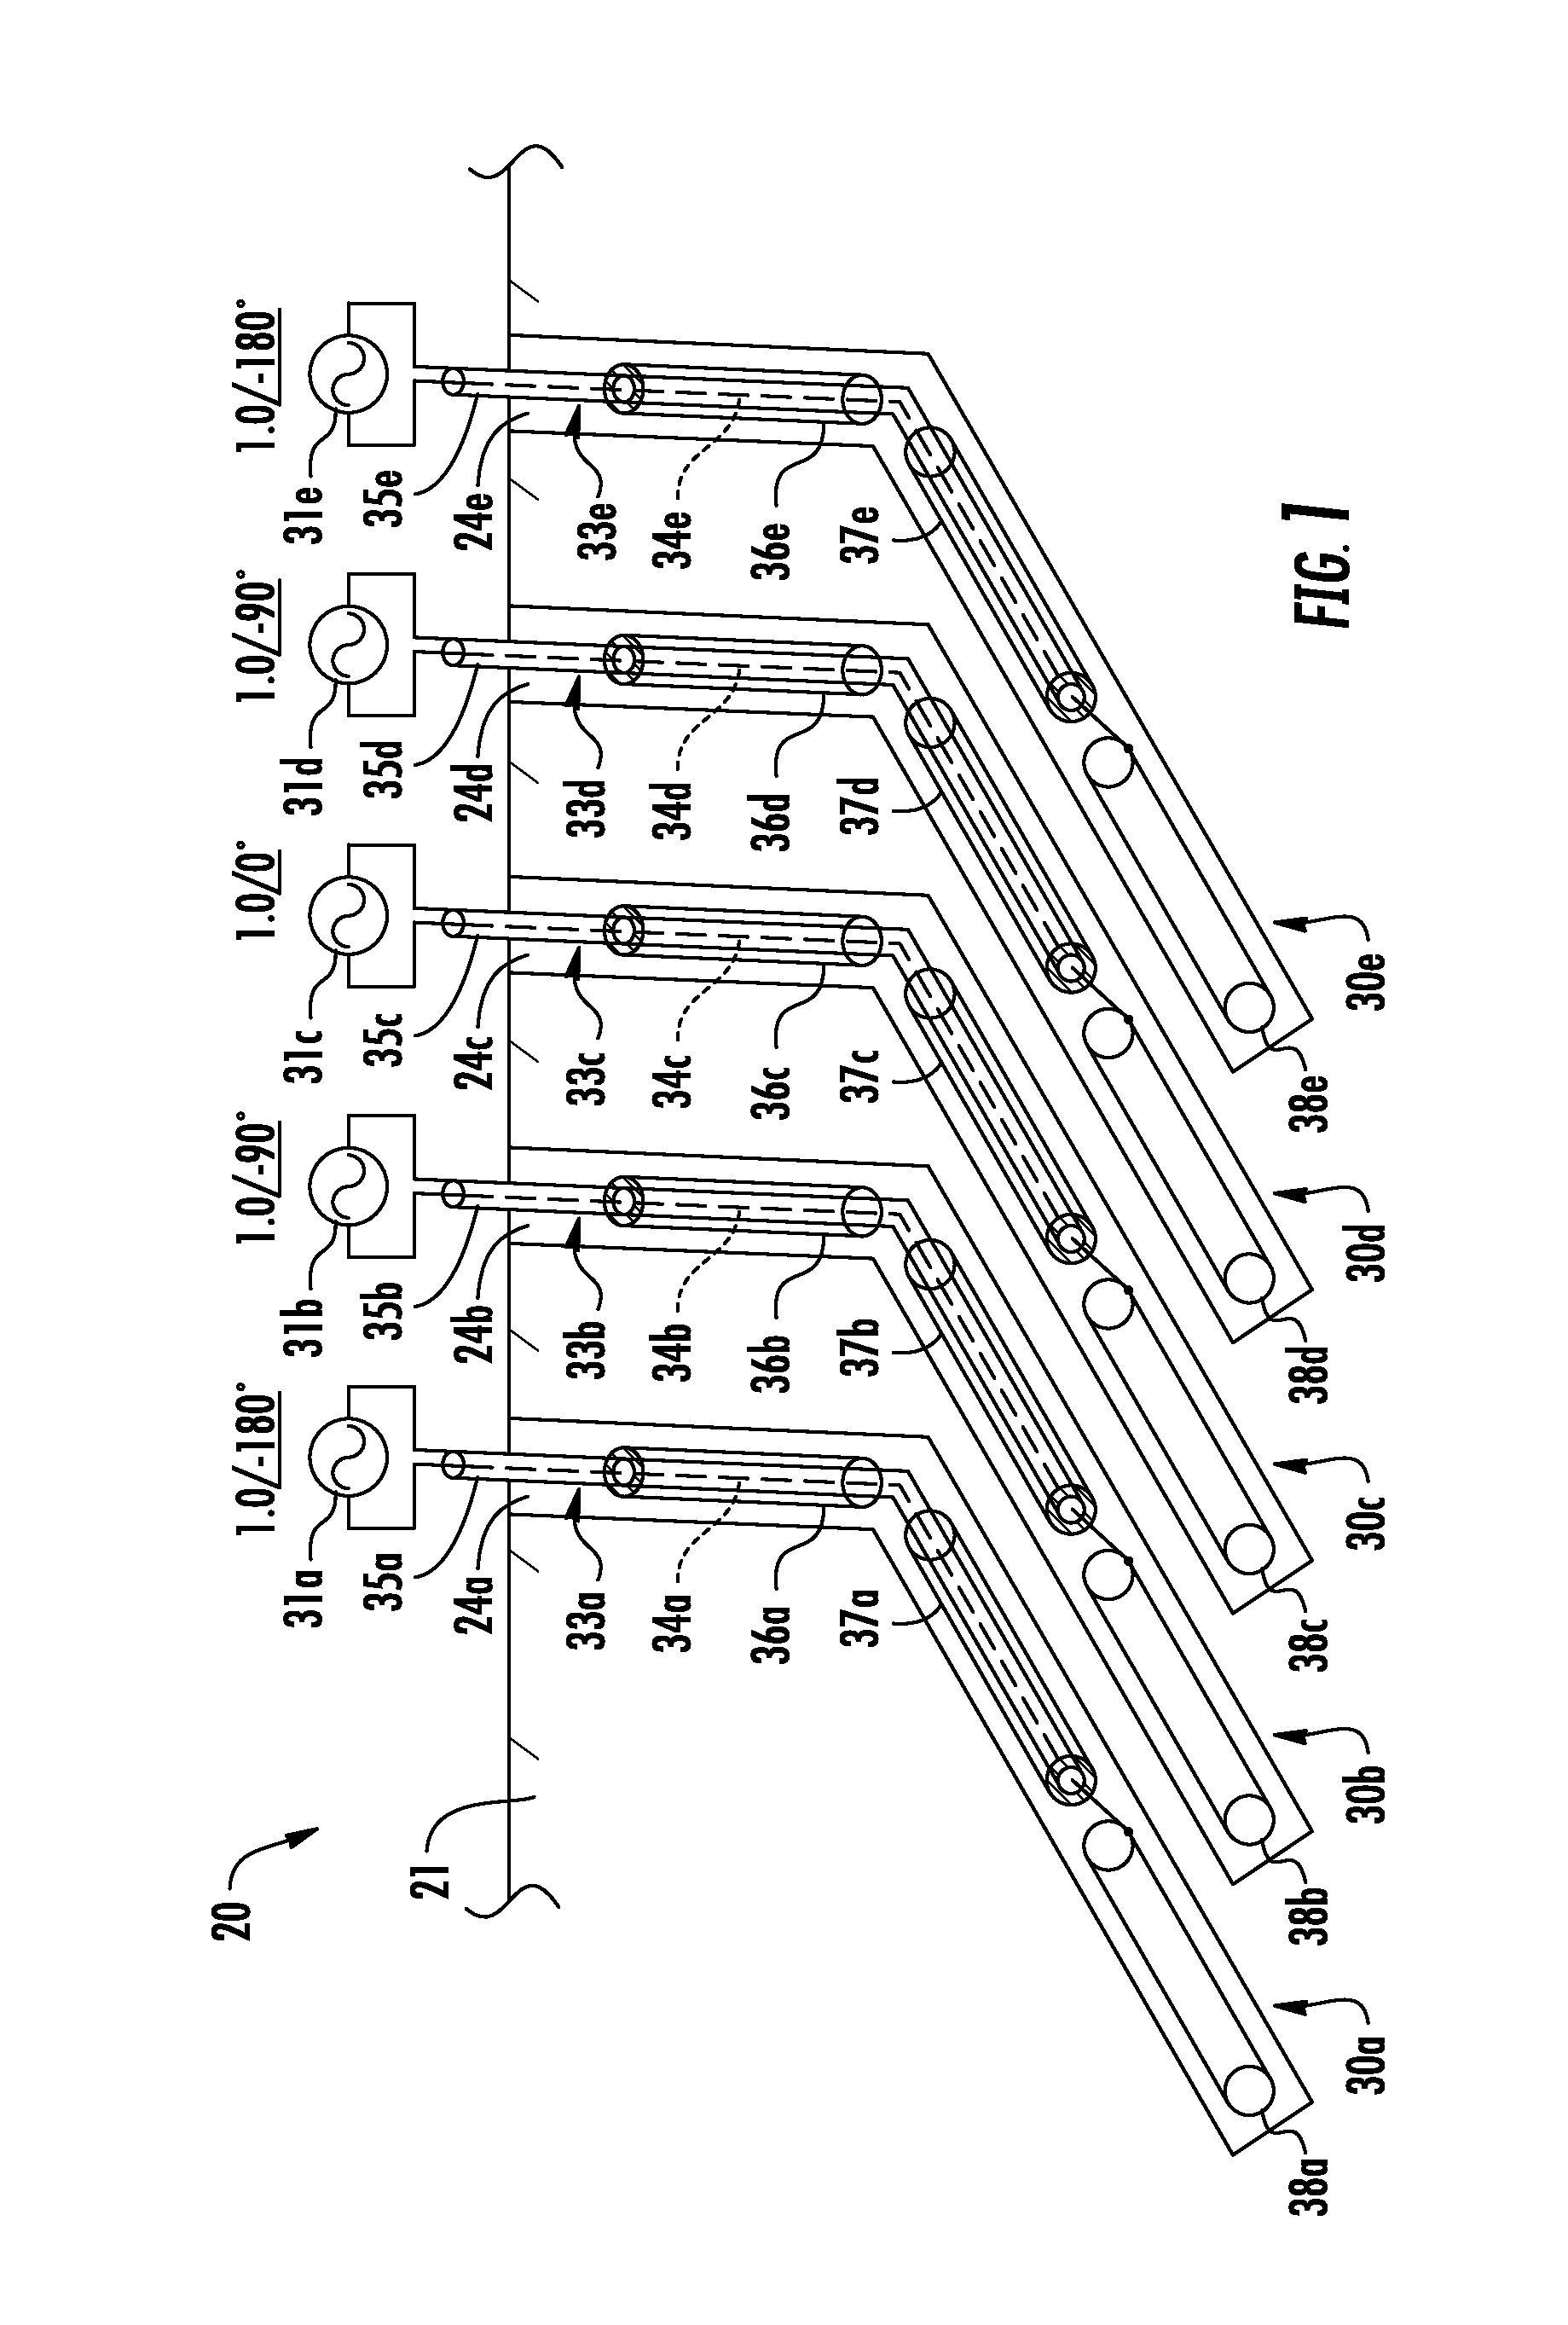 Hydrocarbon resource heating system including RF antennas driven at different phases and related methods